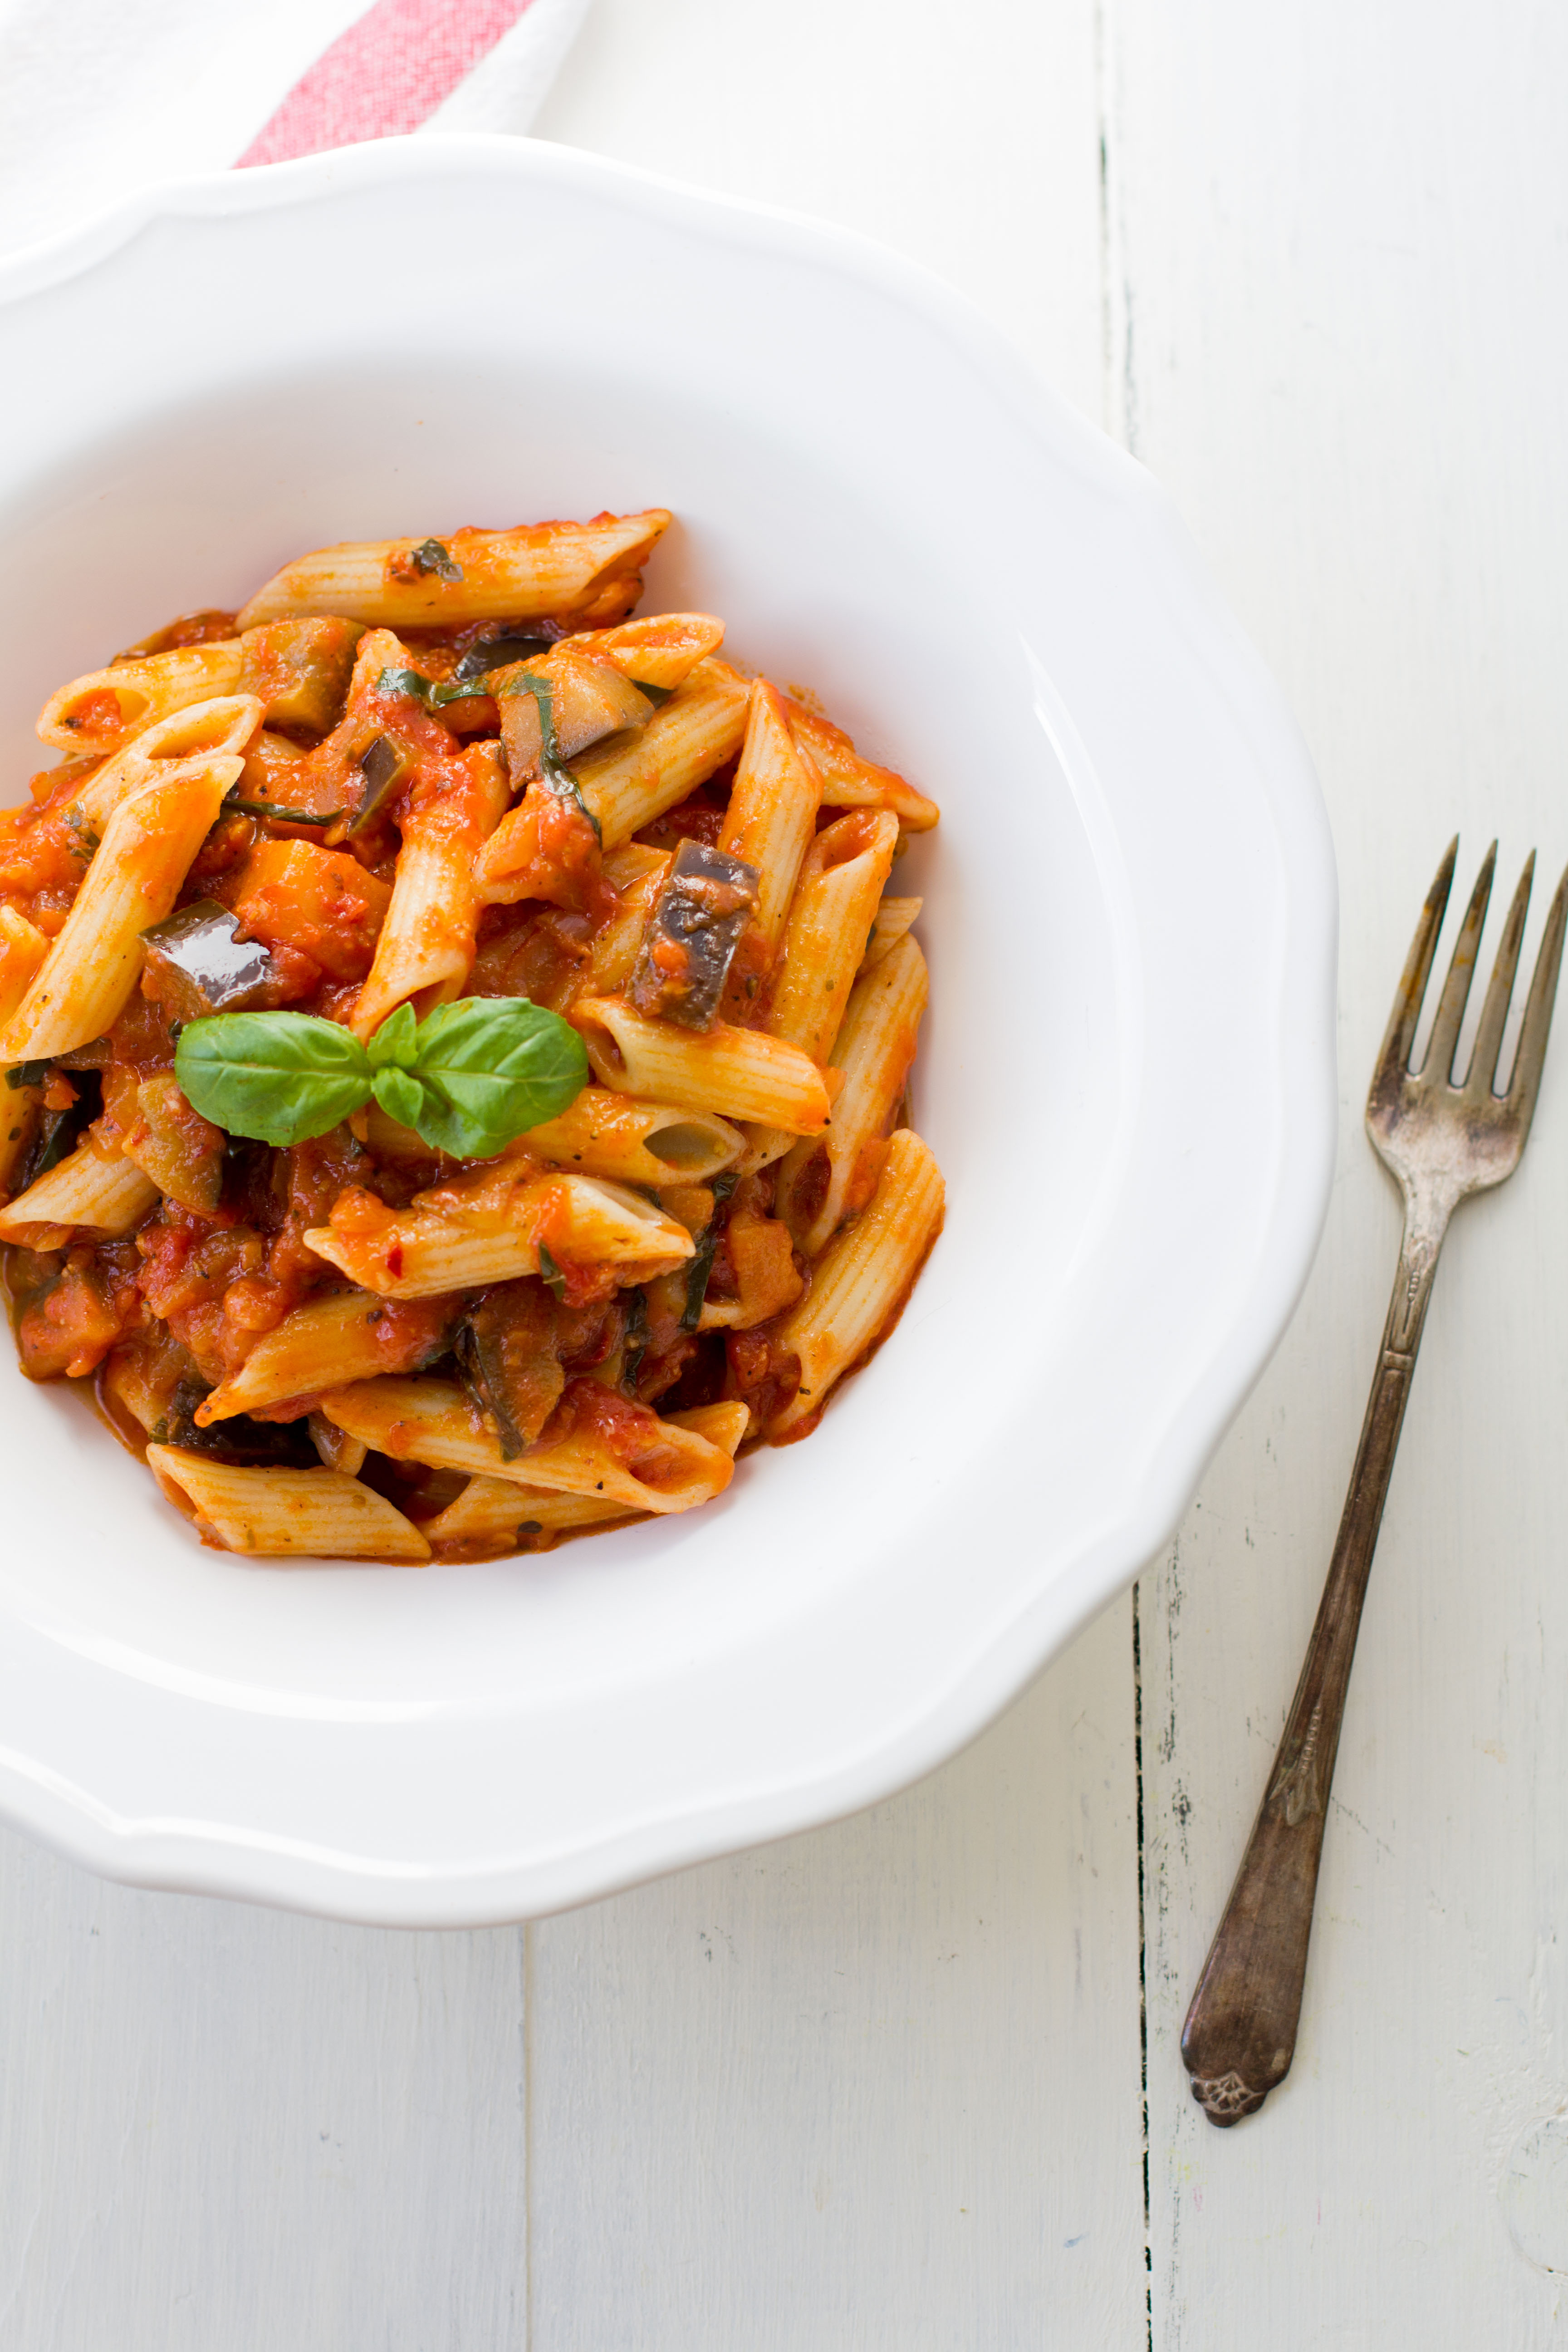 This hearty, healthy, saucy and kinda chunky Vegetarian pasta dish that comes together in a cinch. The flavors come together so well in such a sort amount of time; the sauce itself can be done in under 20 minutes.